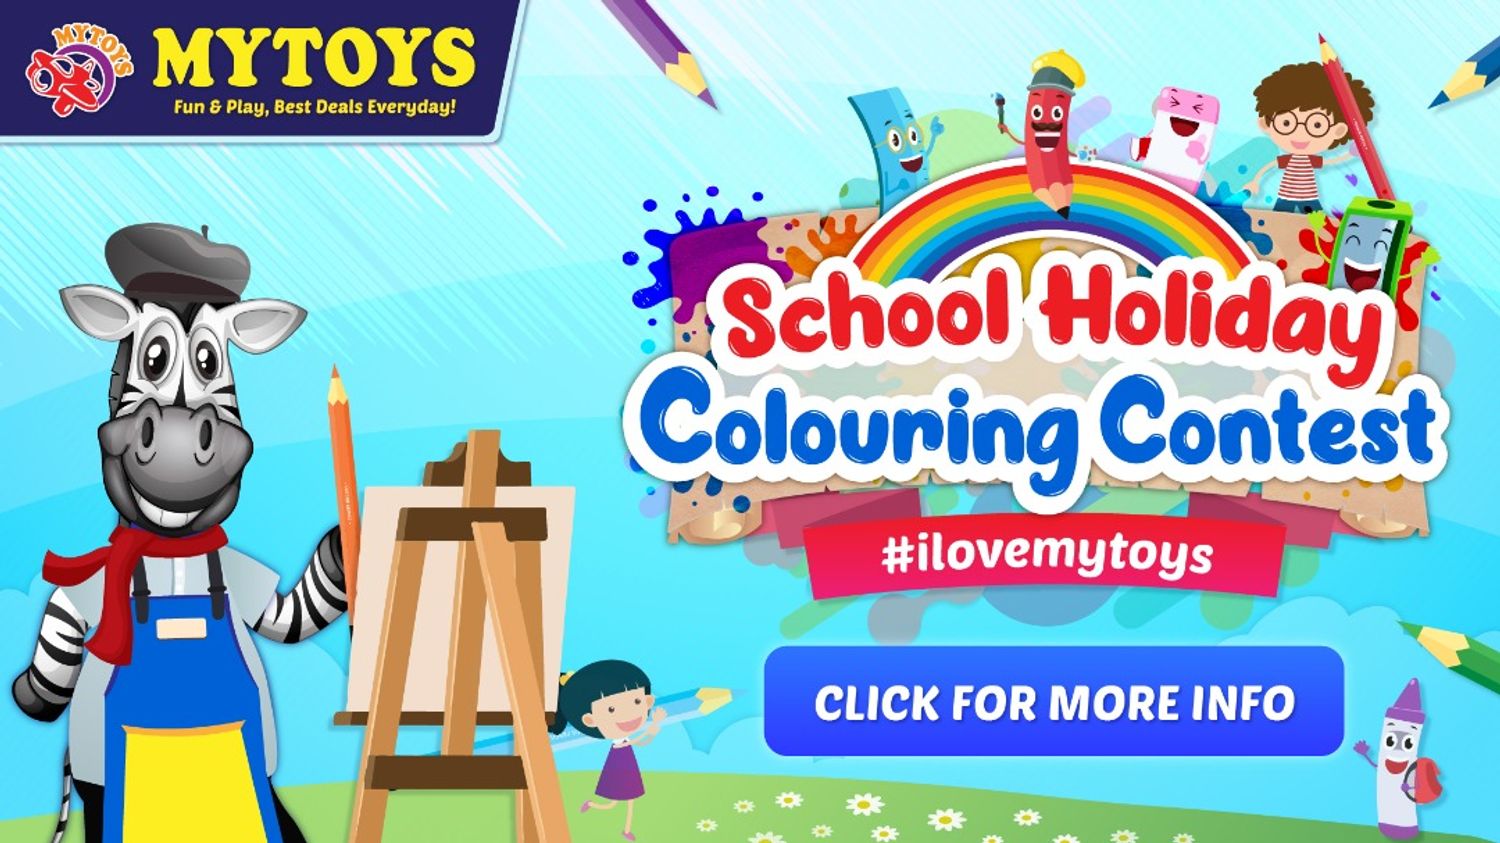 mytoys kids school holiday colouring contest 2020